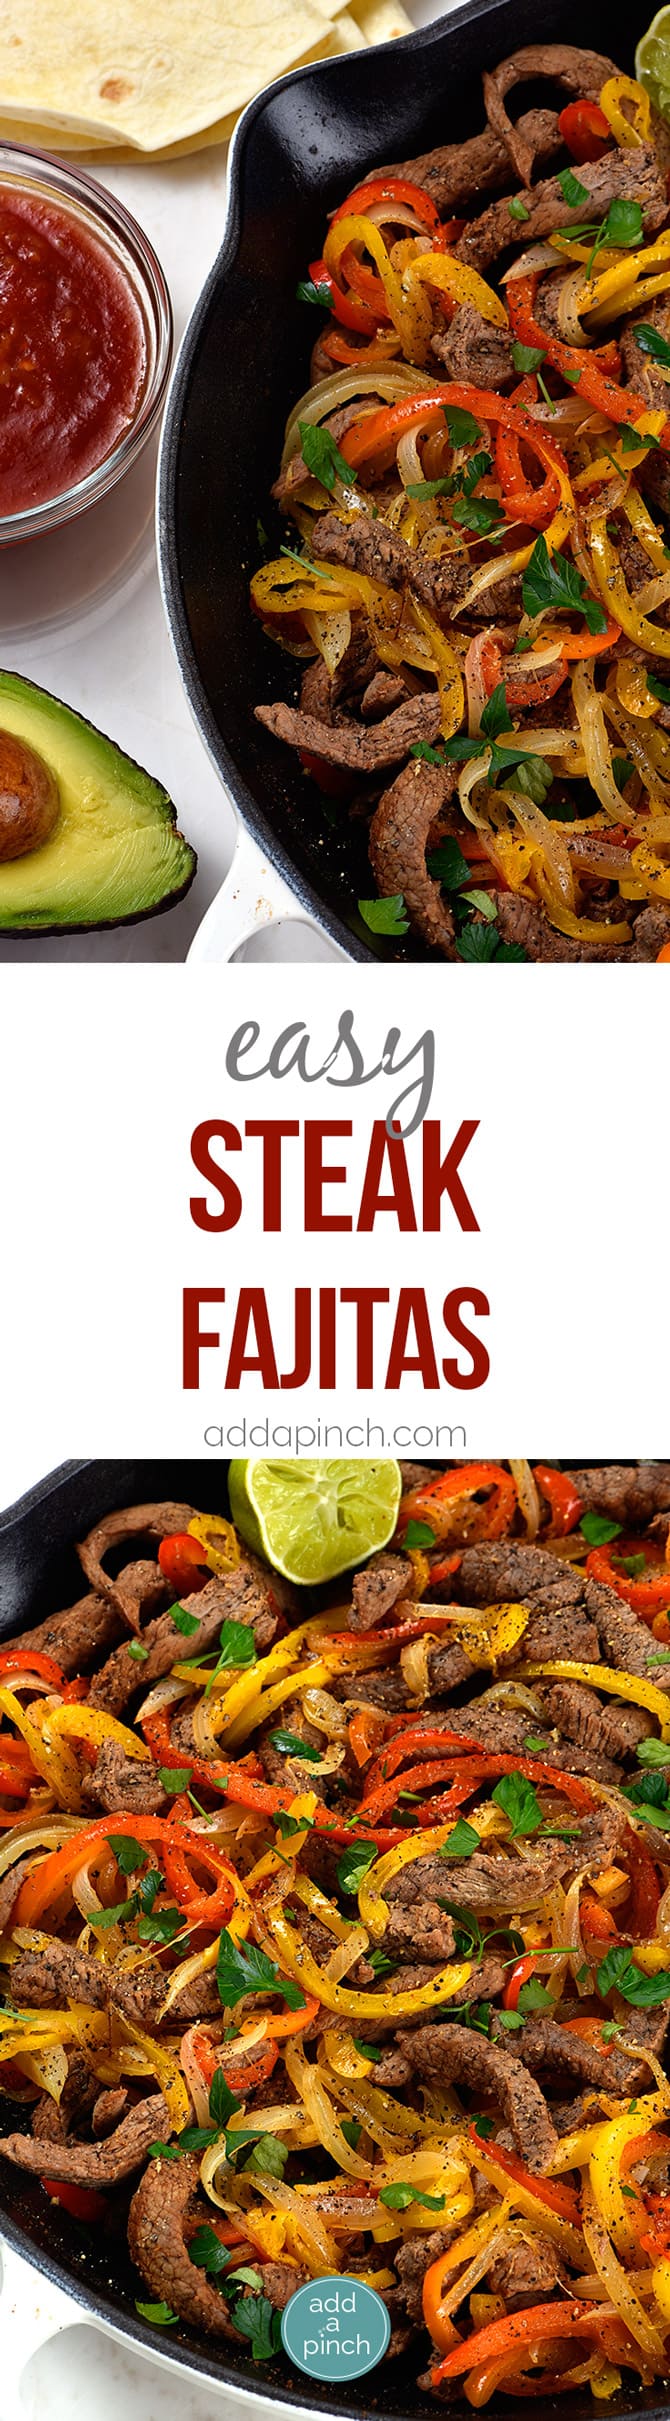 Steak Fajitas Recipe - Steak fajitas make a quick and easy meal perfect for weeknight suppers or weekend celebrations! Made with beef, peppers, onions and served with a stack of warm tortillas and condiments. They are always a favorite! // addapinch.com